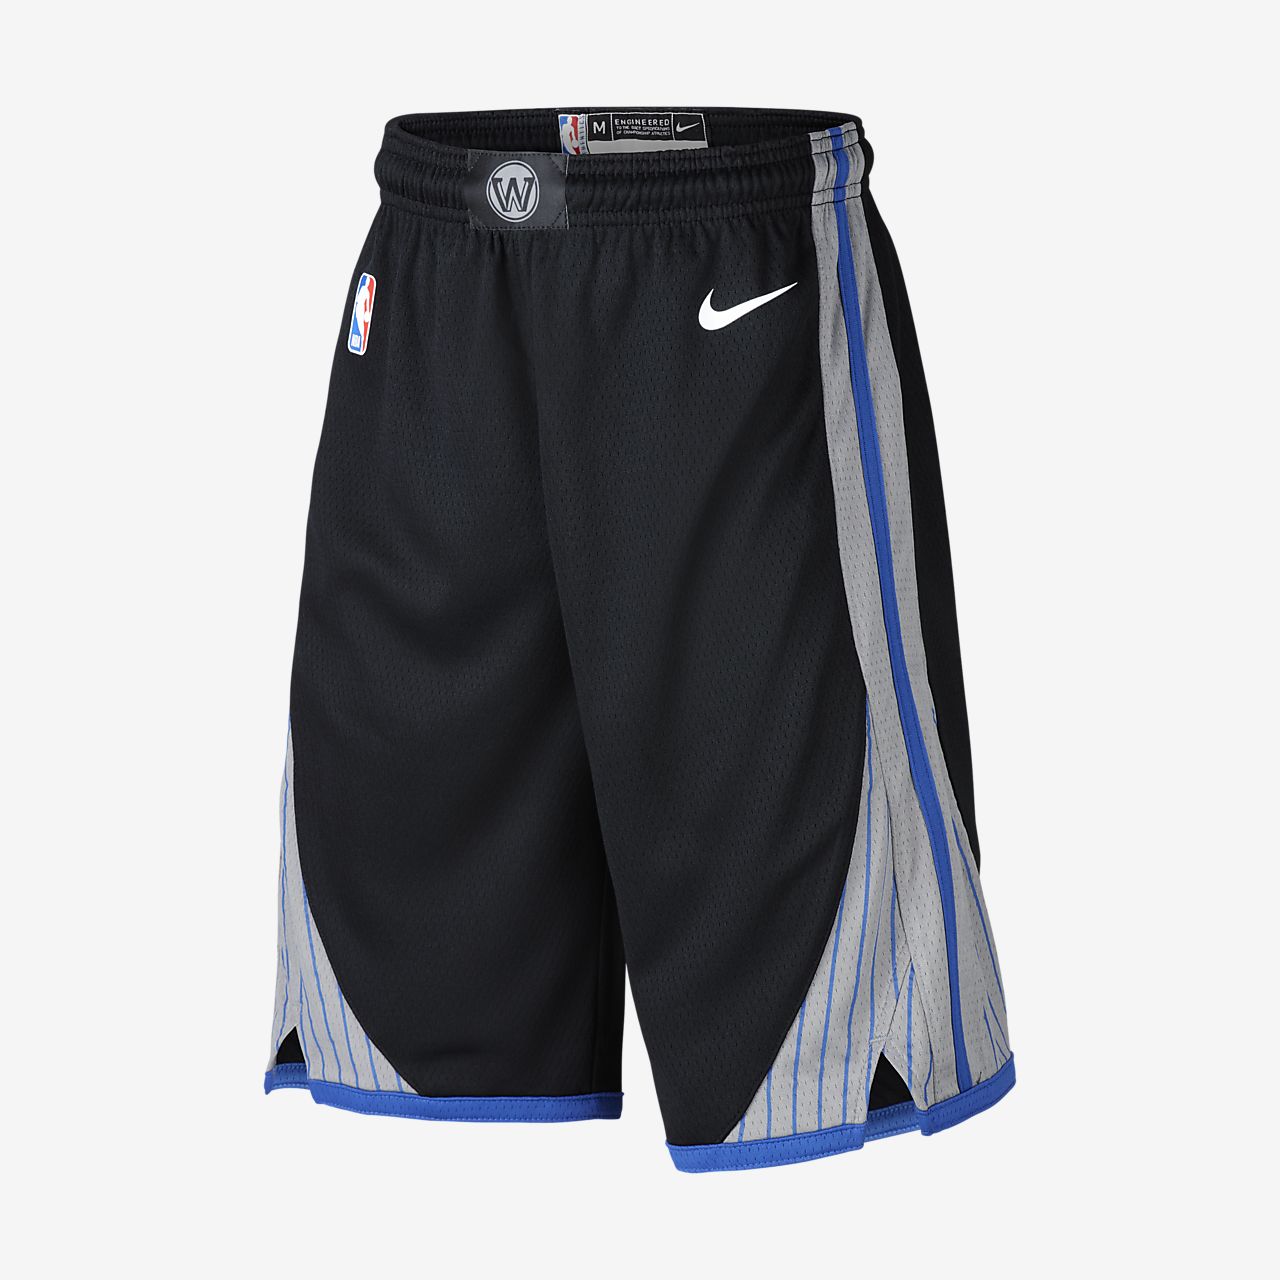 golden state warriors the city shorts